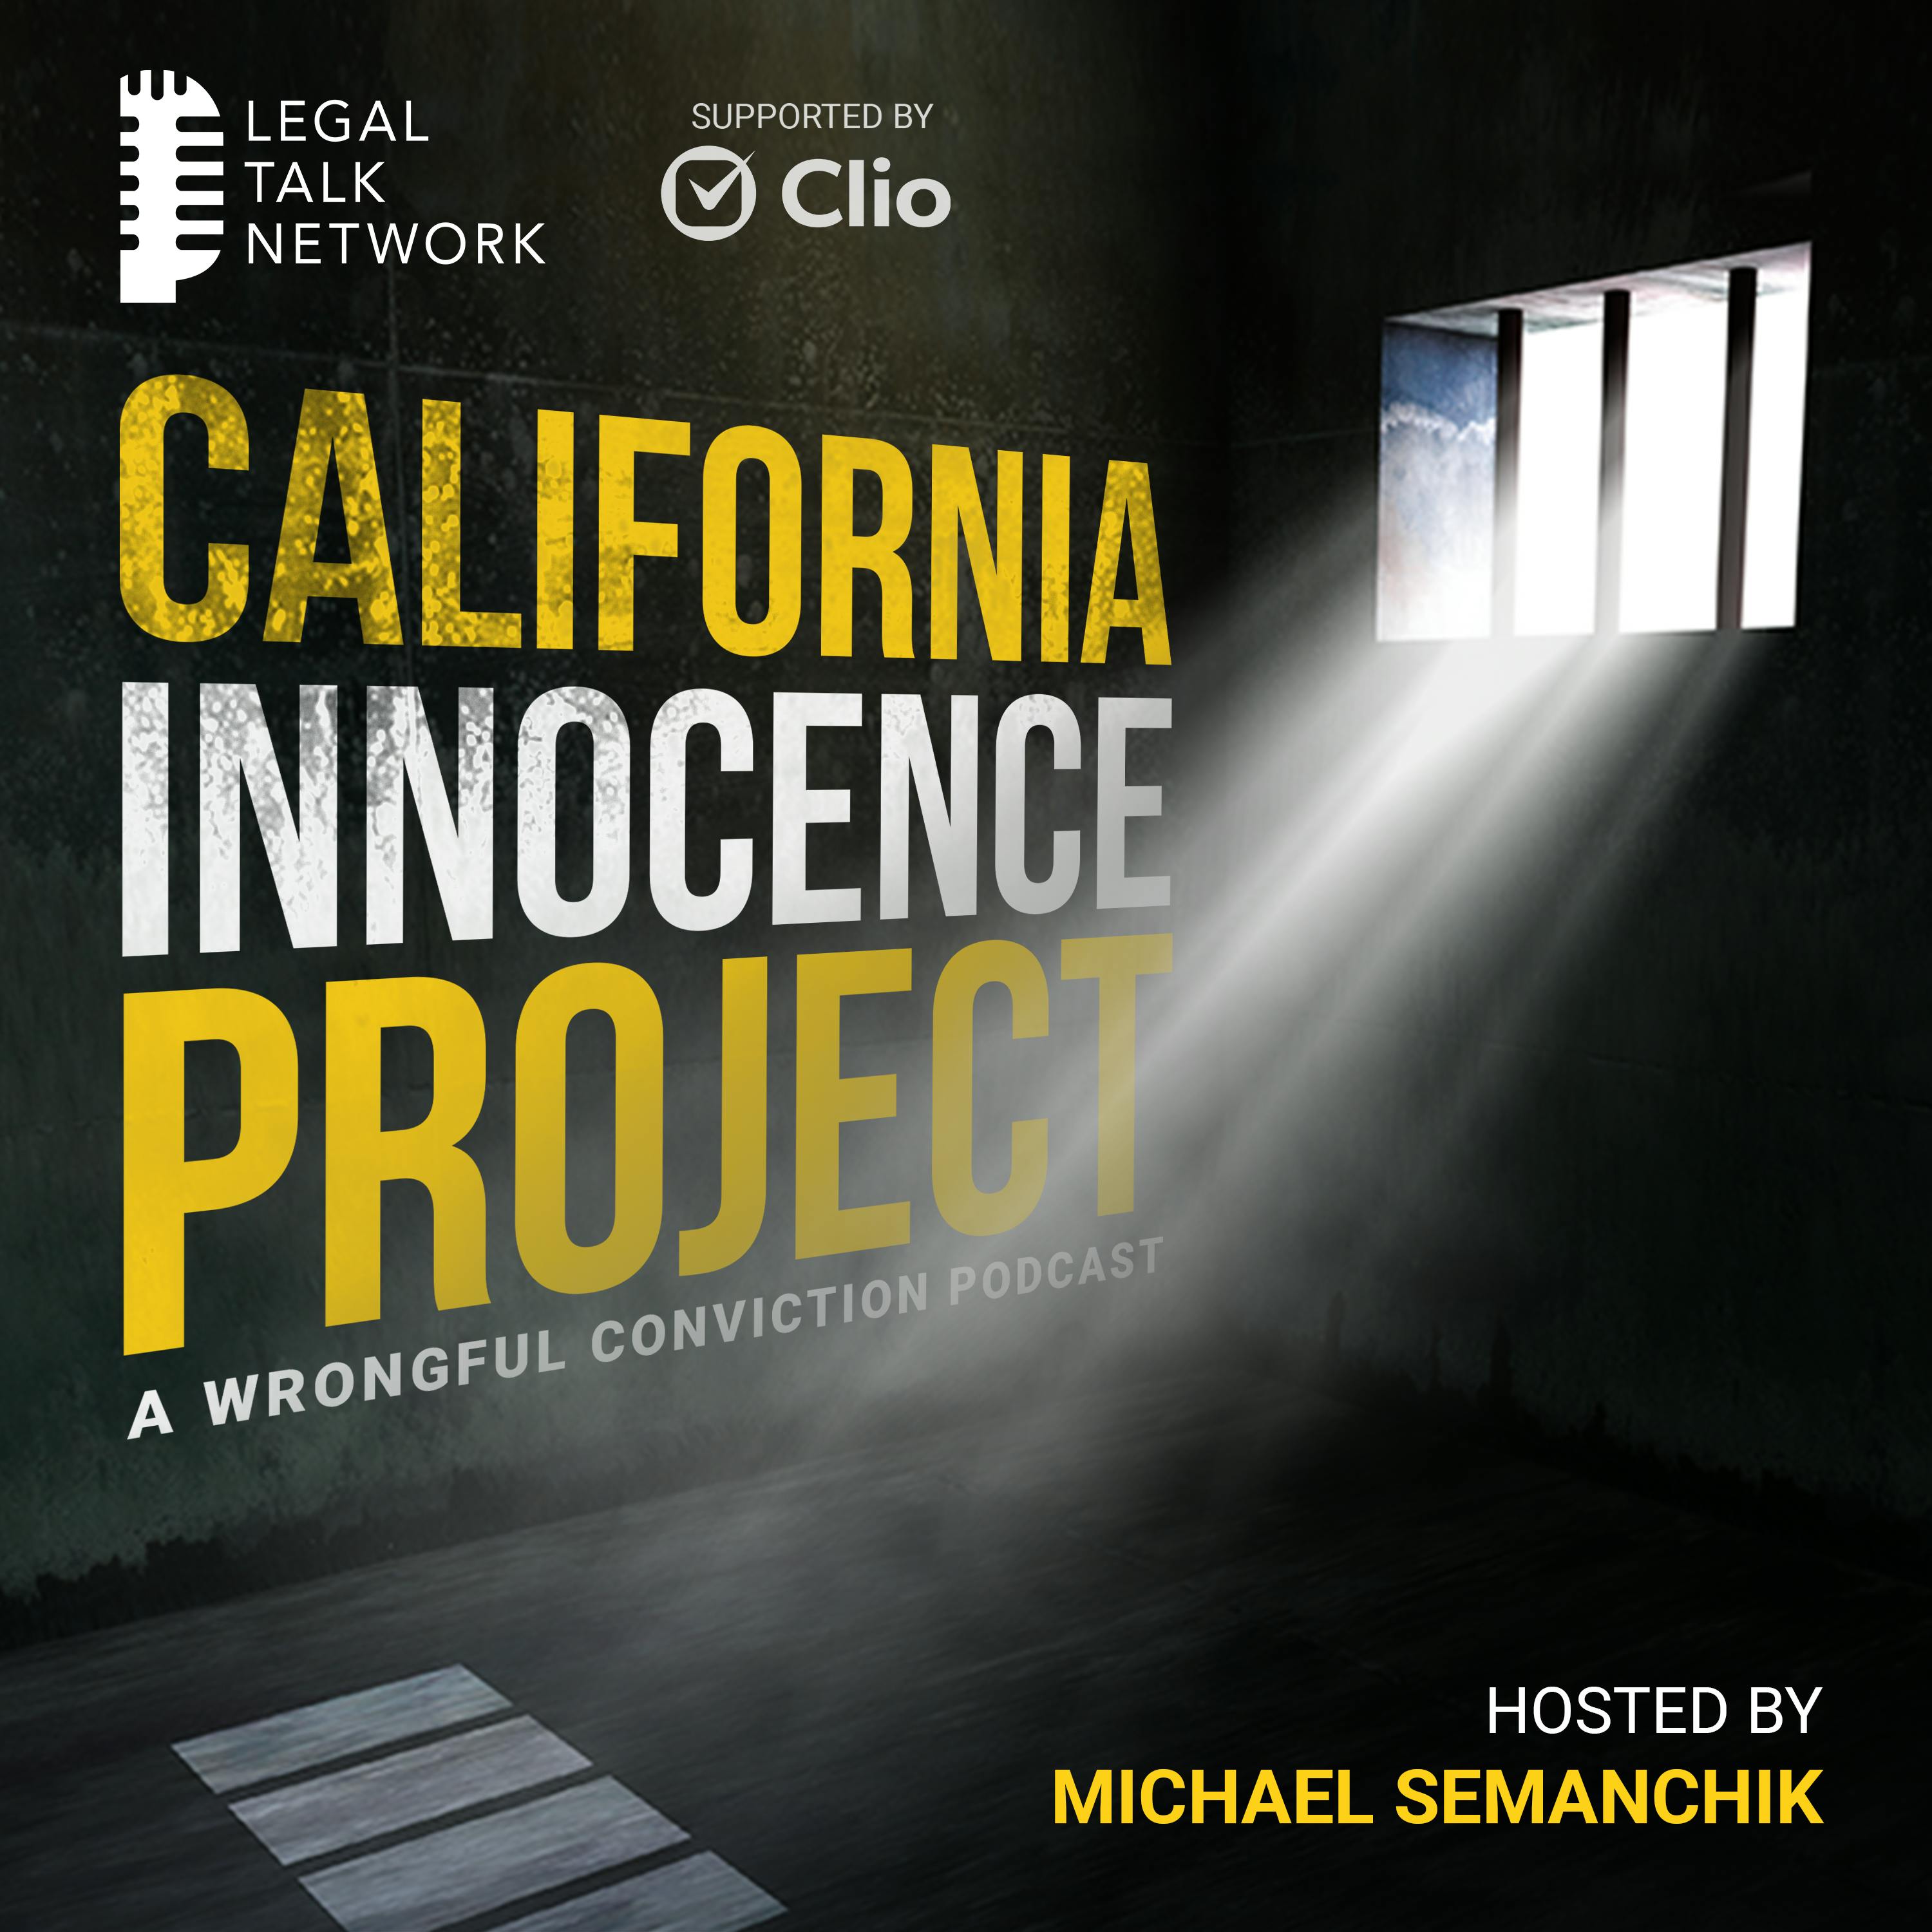 Welcome to the California Innocence Project Podcast